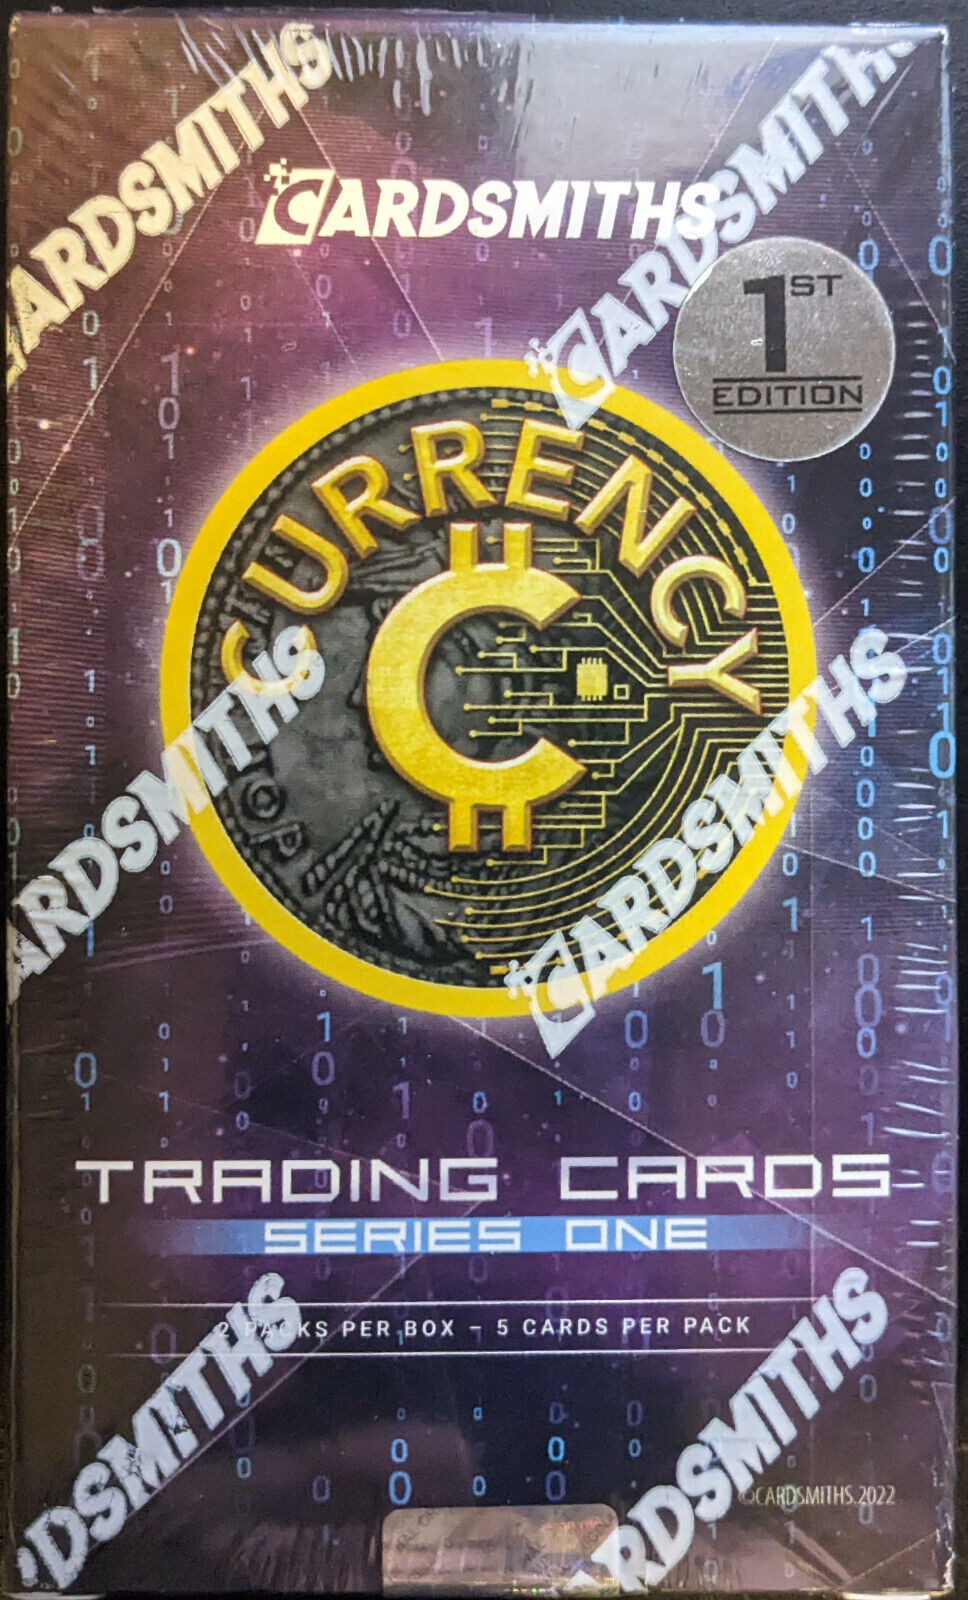 2022 CARDSMITHS 1st Edition Currency Series Trading Cards Box 2 Packs -Elon Musk